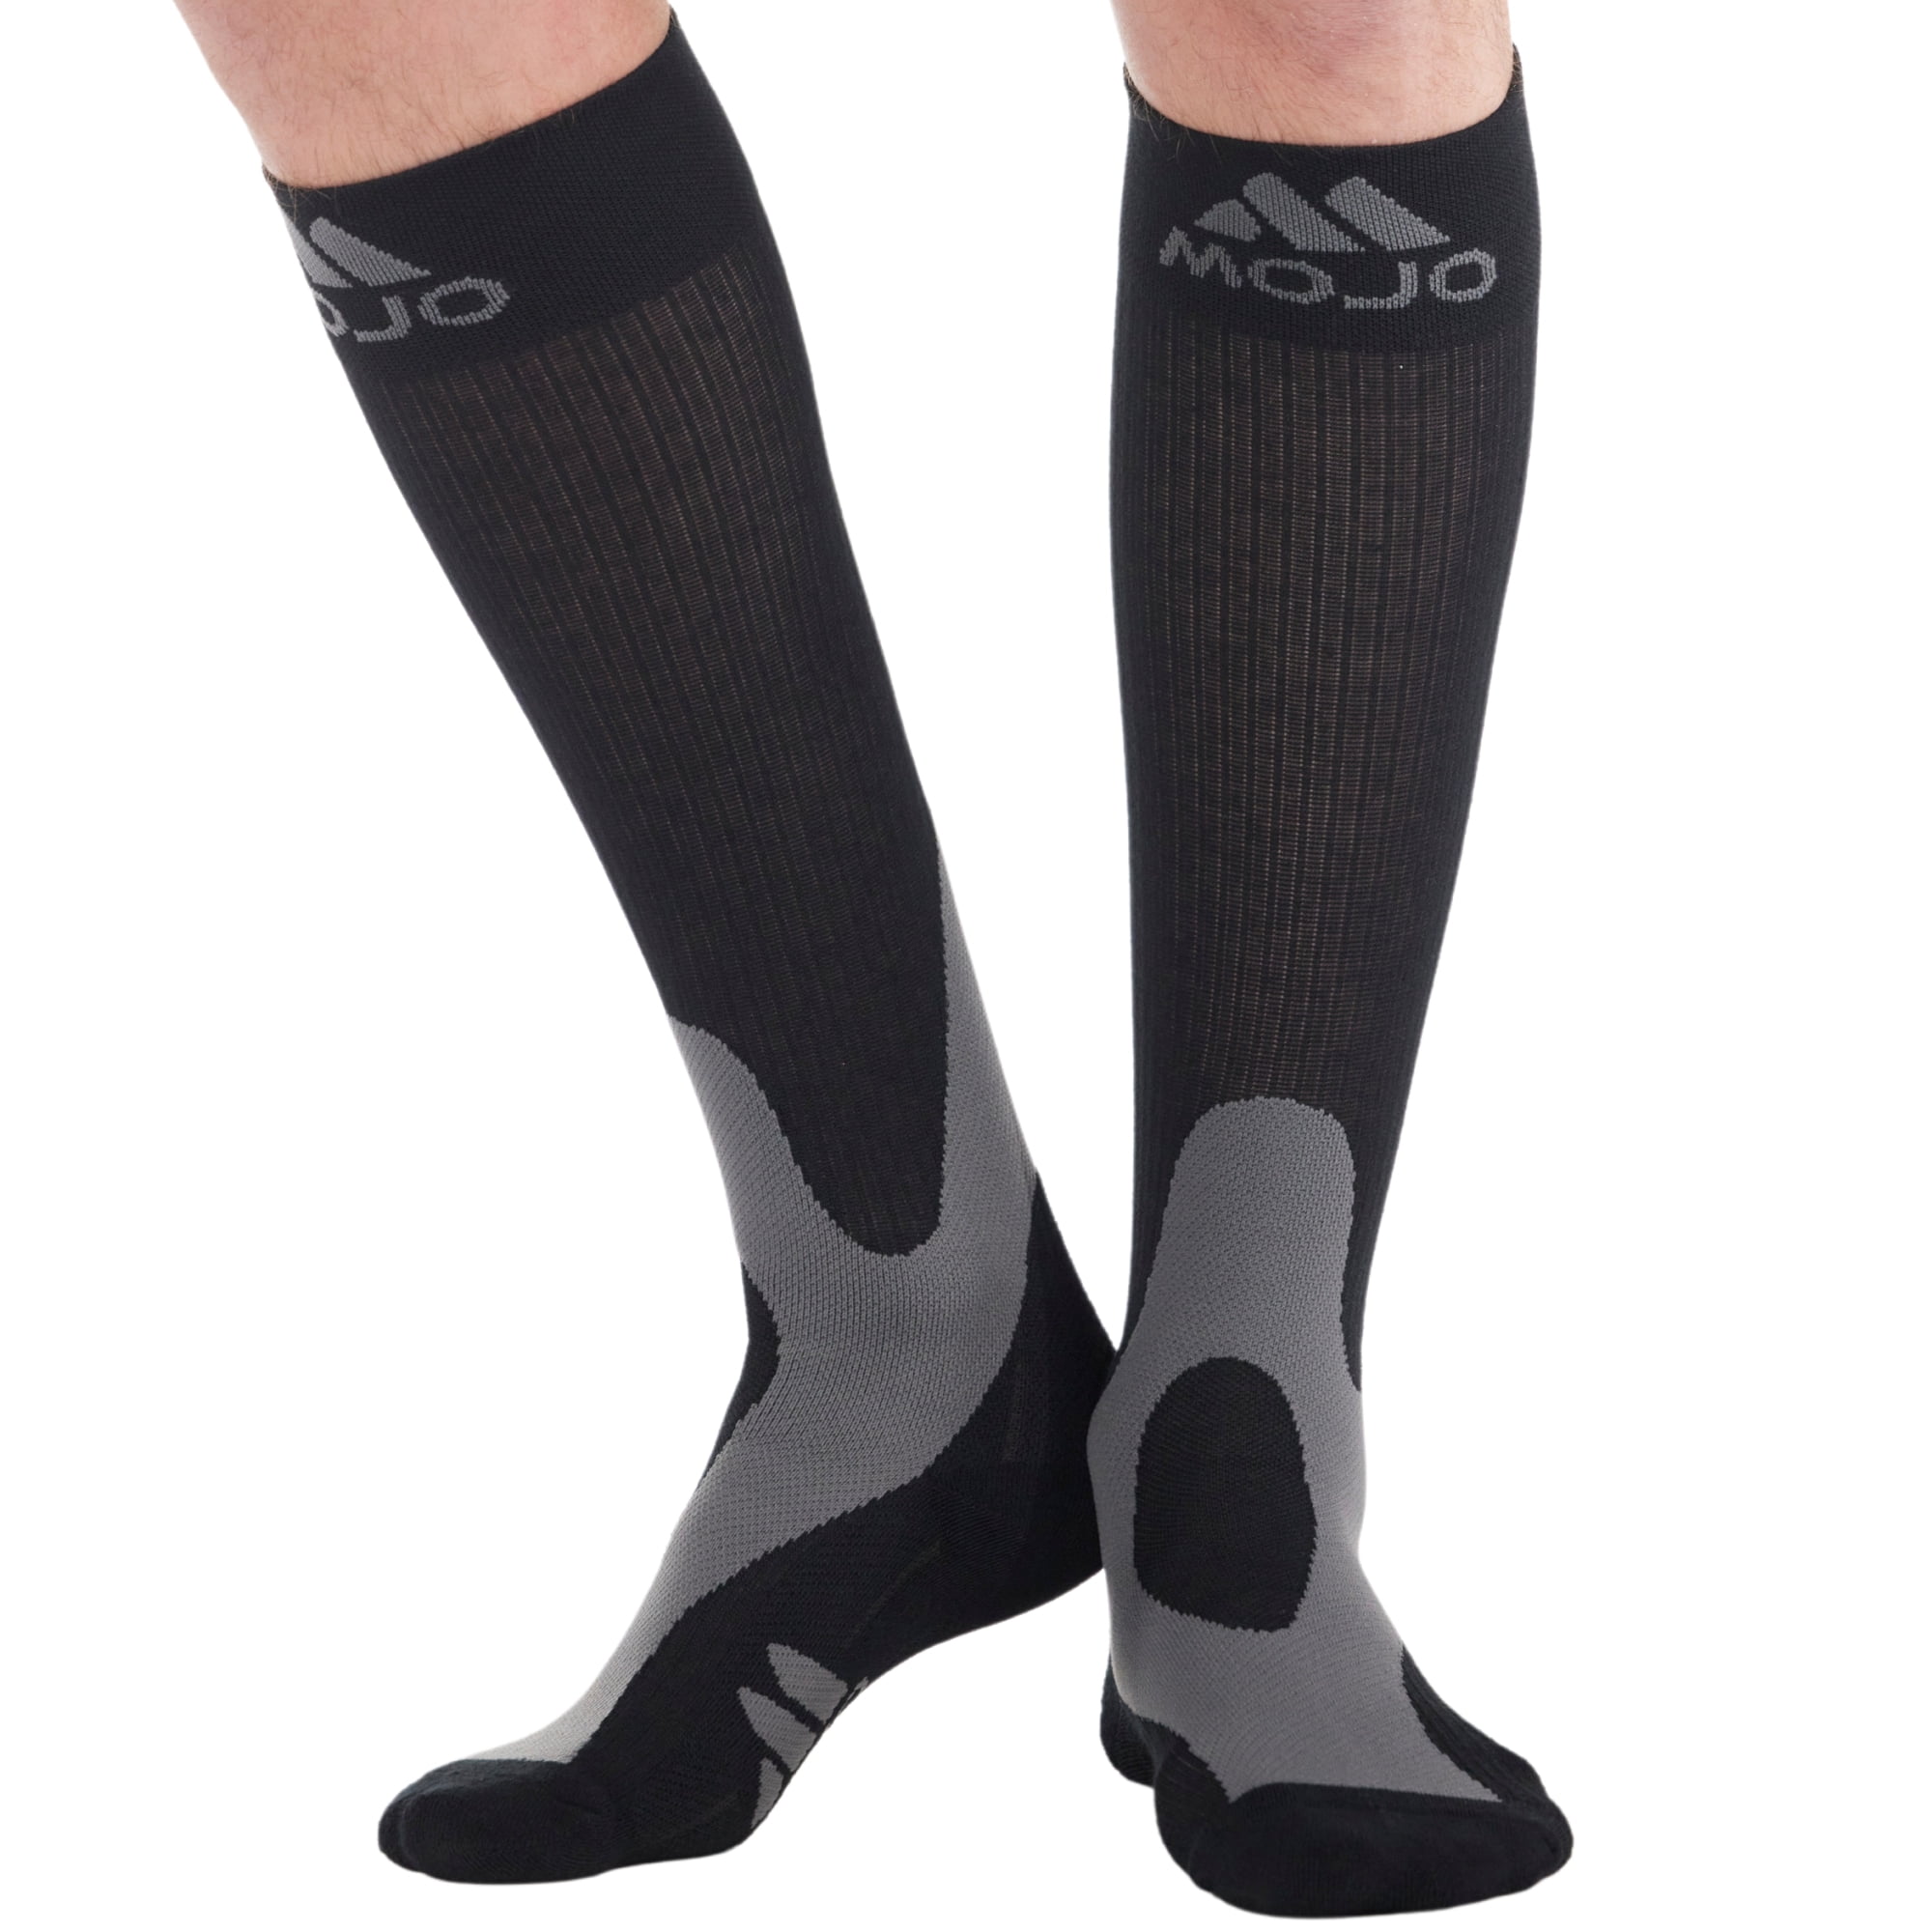  Calf Compression Sleeves For Men And Women - Leg Compression  Sleeve - Footless Compression Socks For Runners